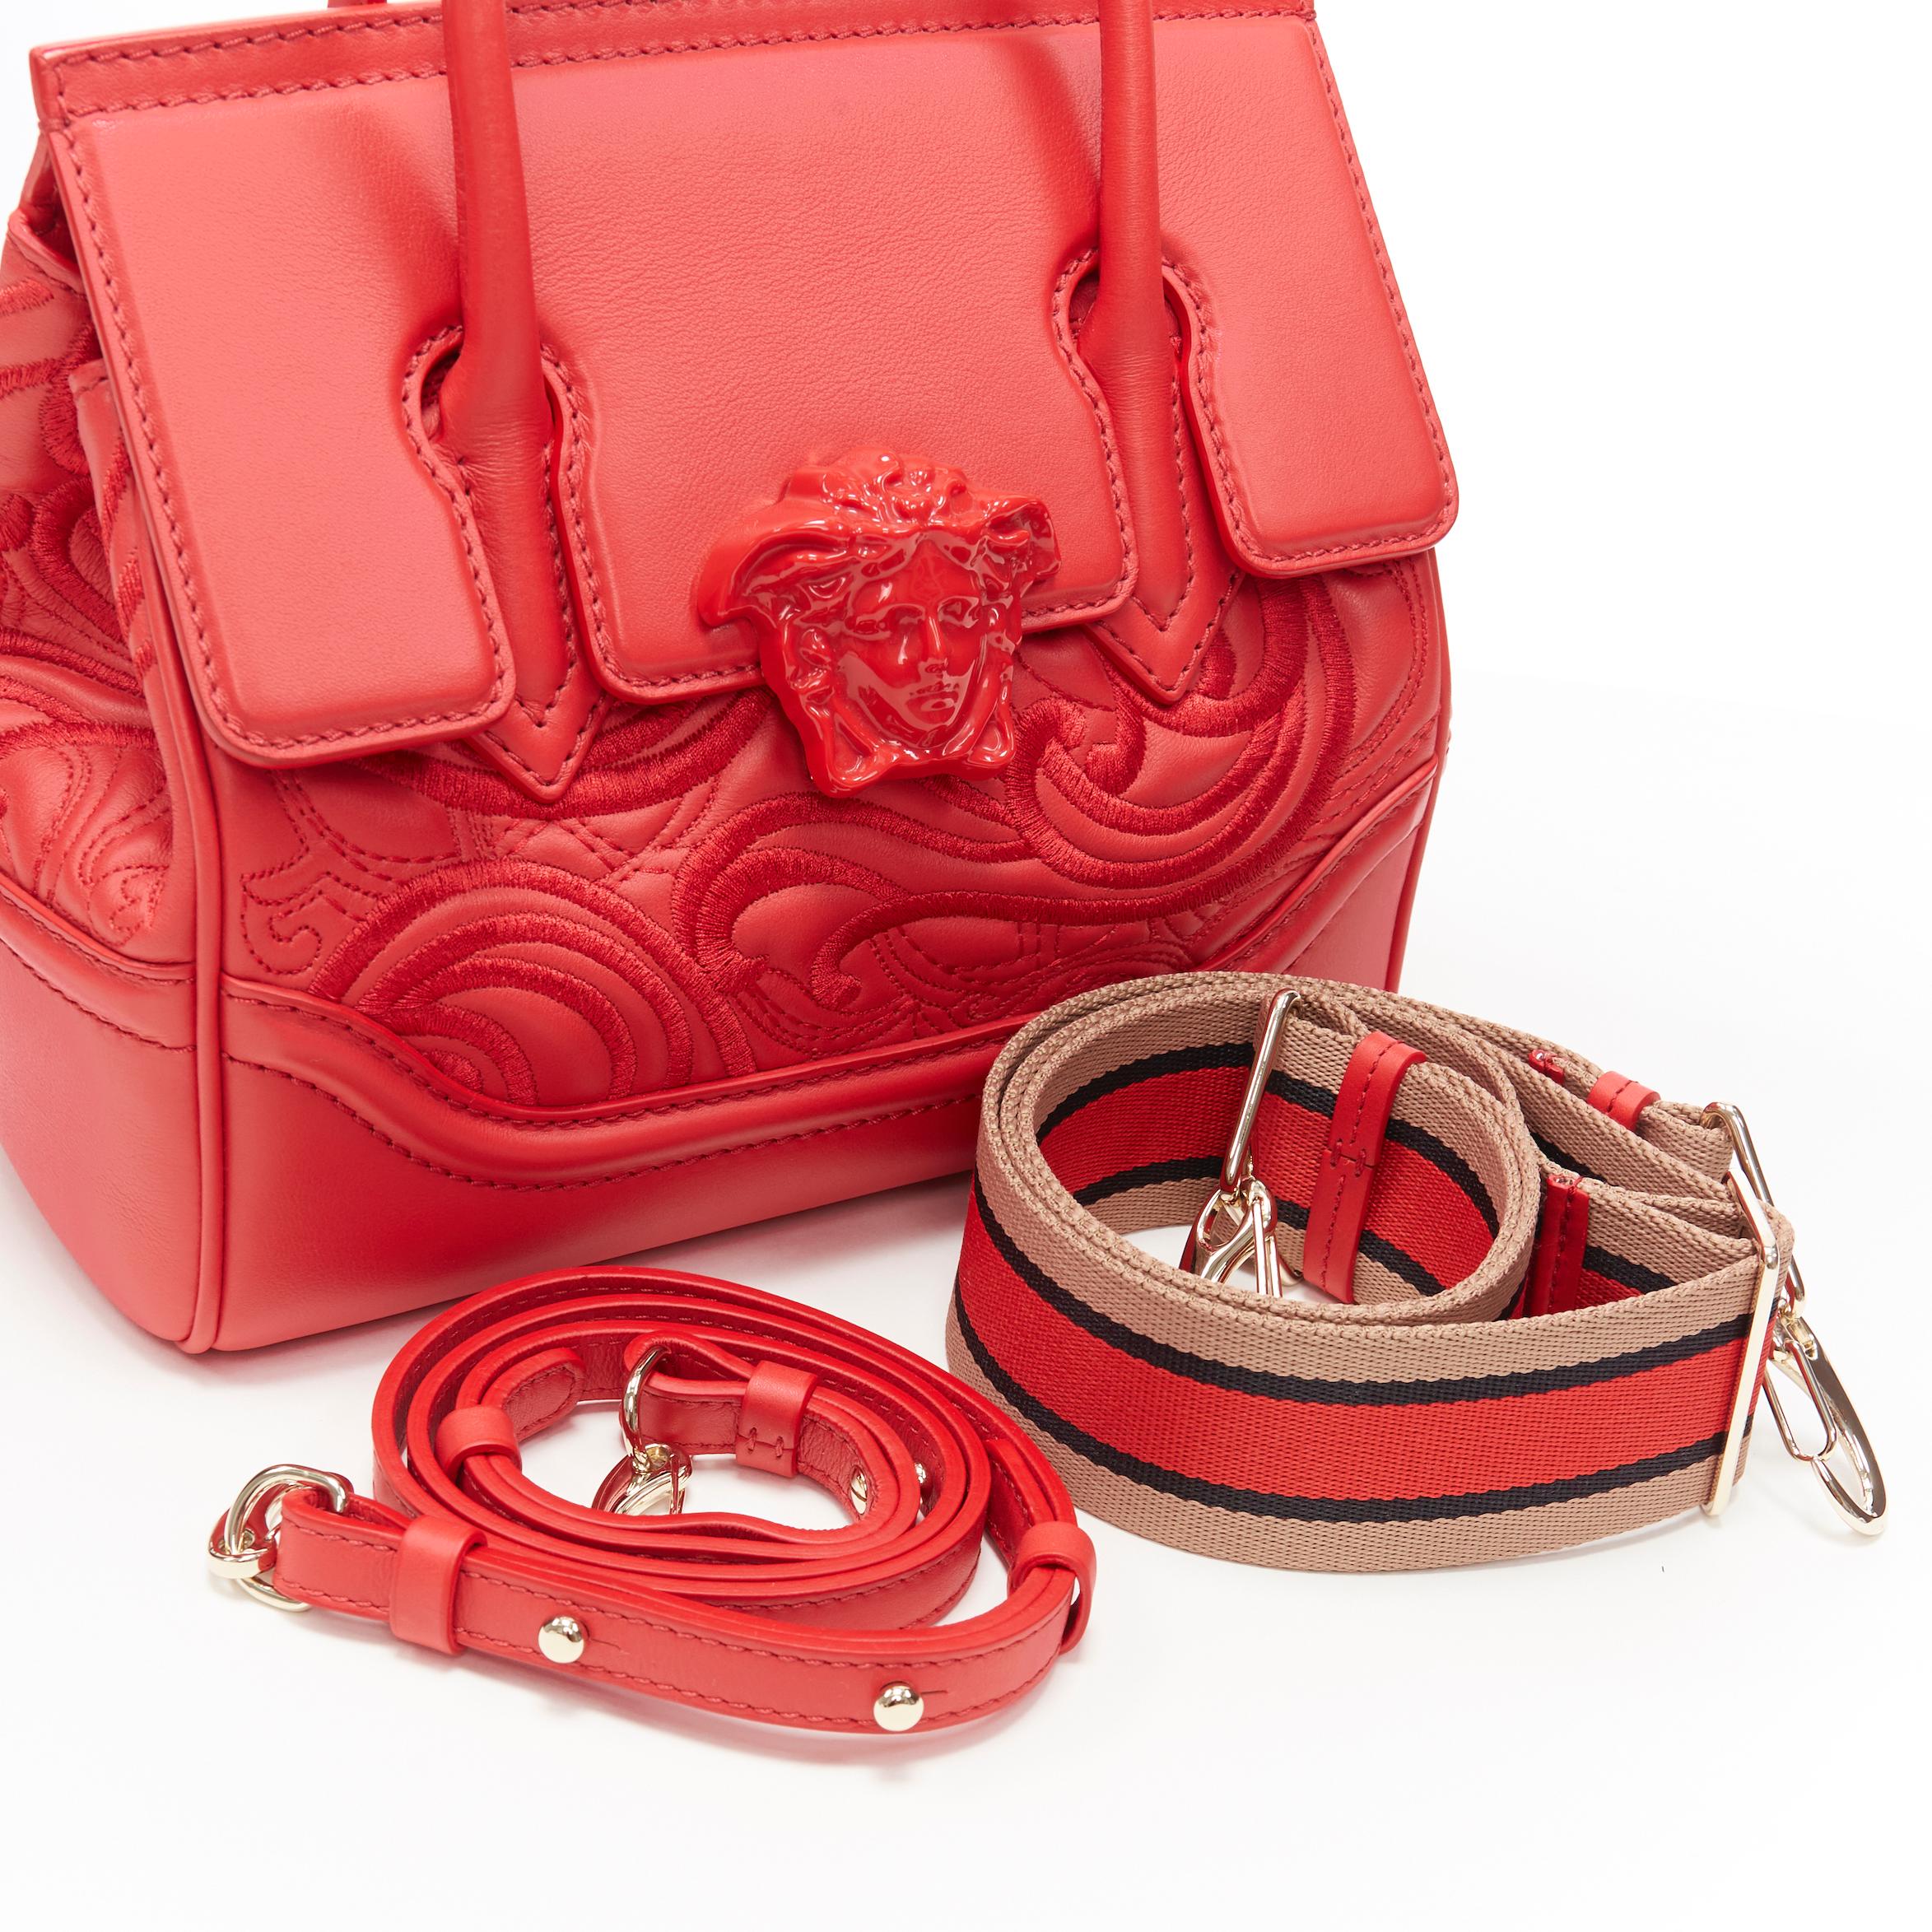 new VERSACE Palazzo Empire Small Baroque Embroidery red Medusa head satchel bag 7